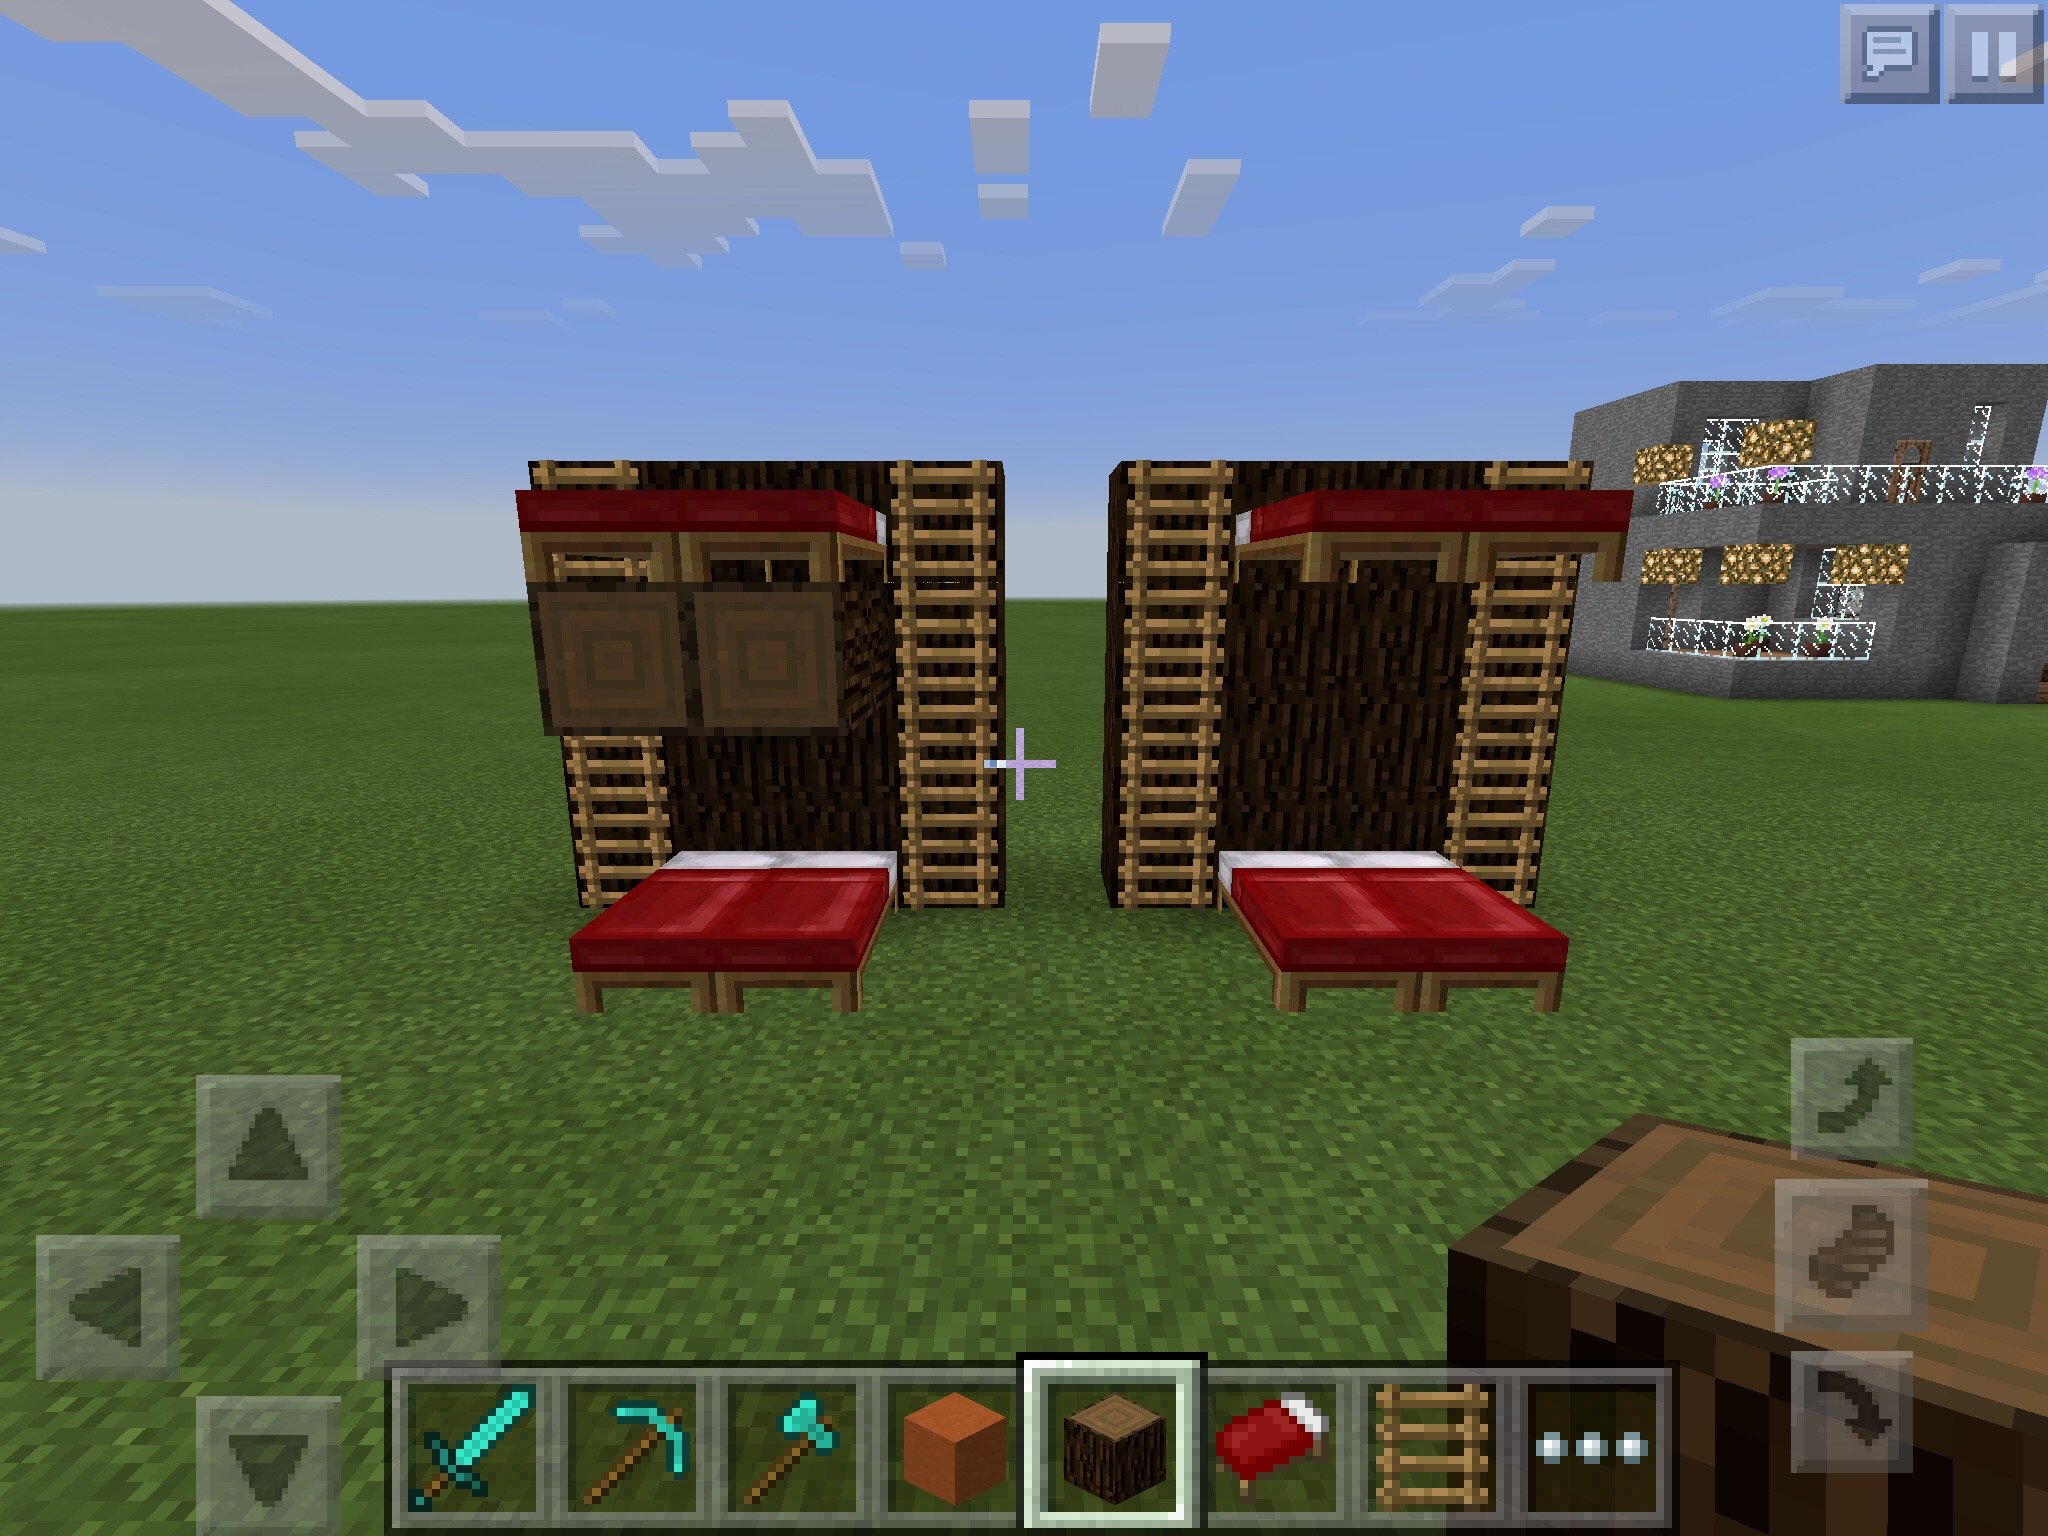 Build A Bunk Bed In Minecraft P E, How To Make A Bunk Bed In Minecraft Step By Easy